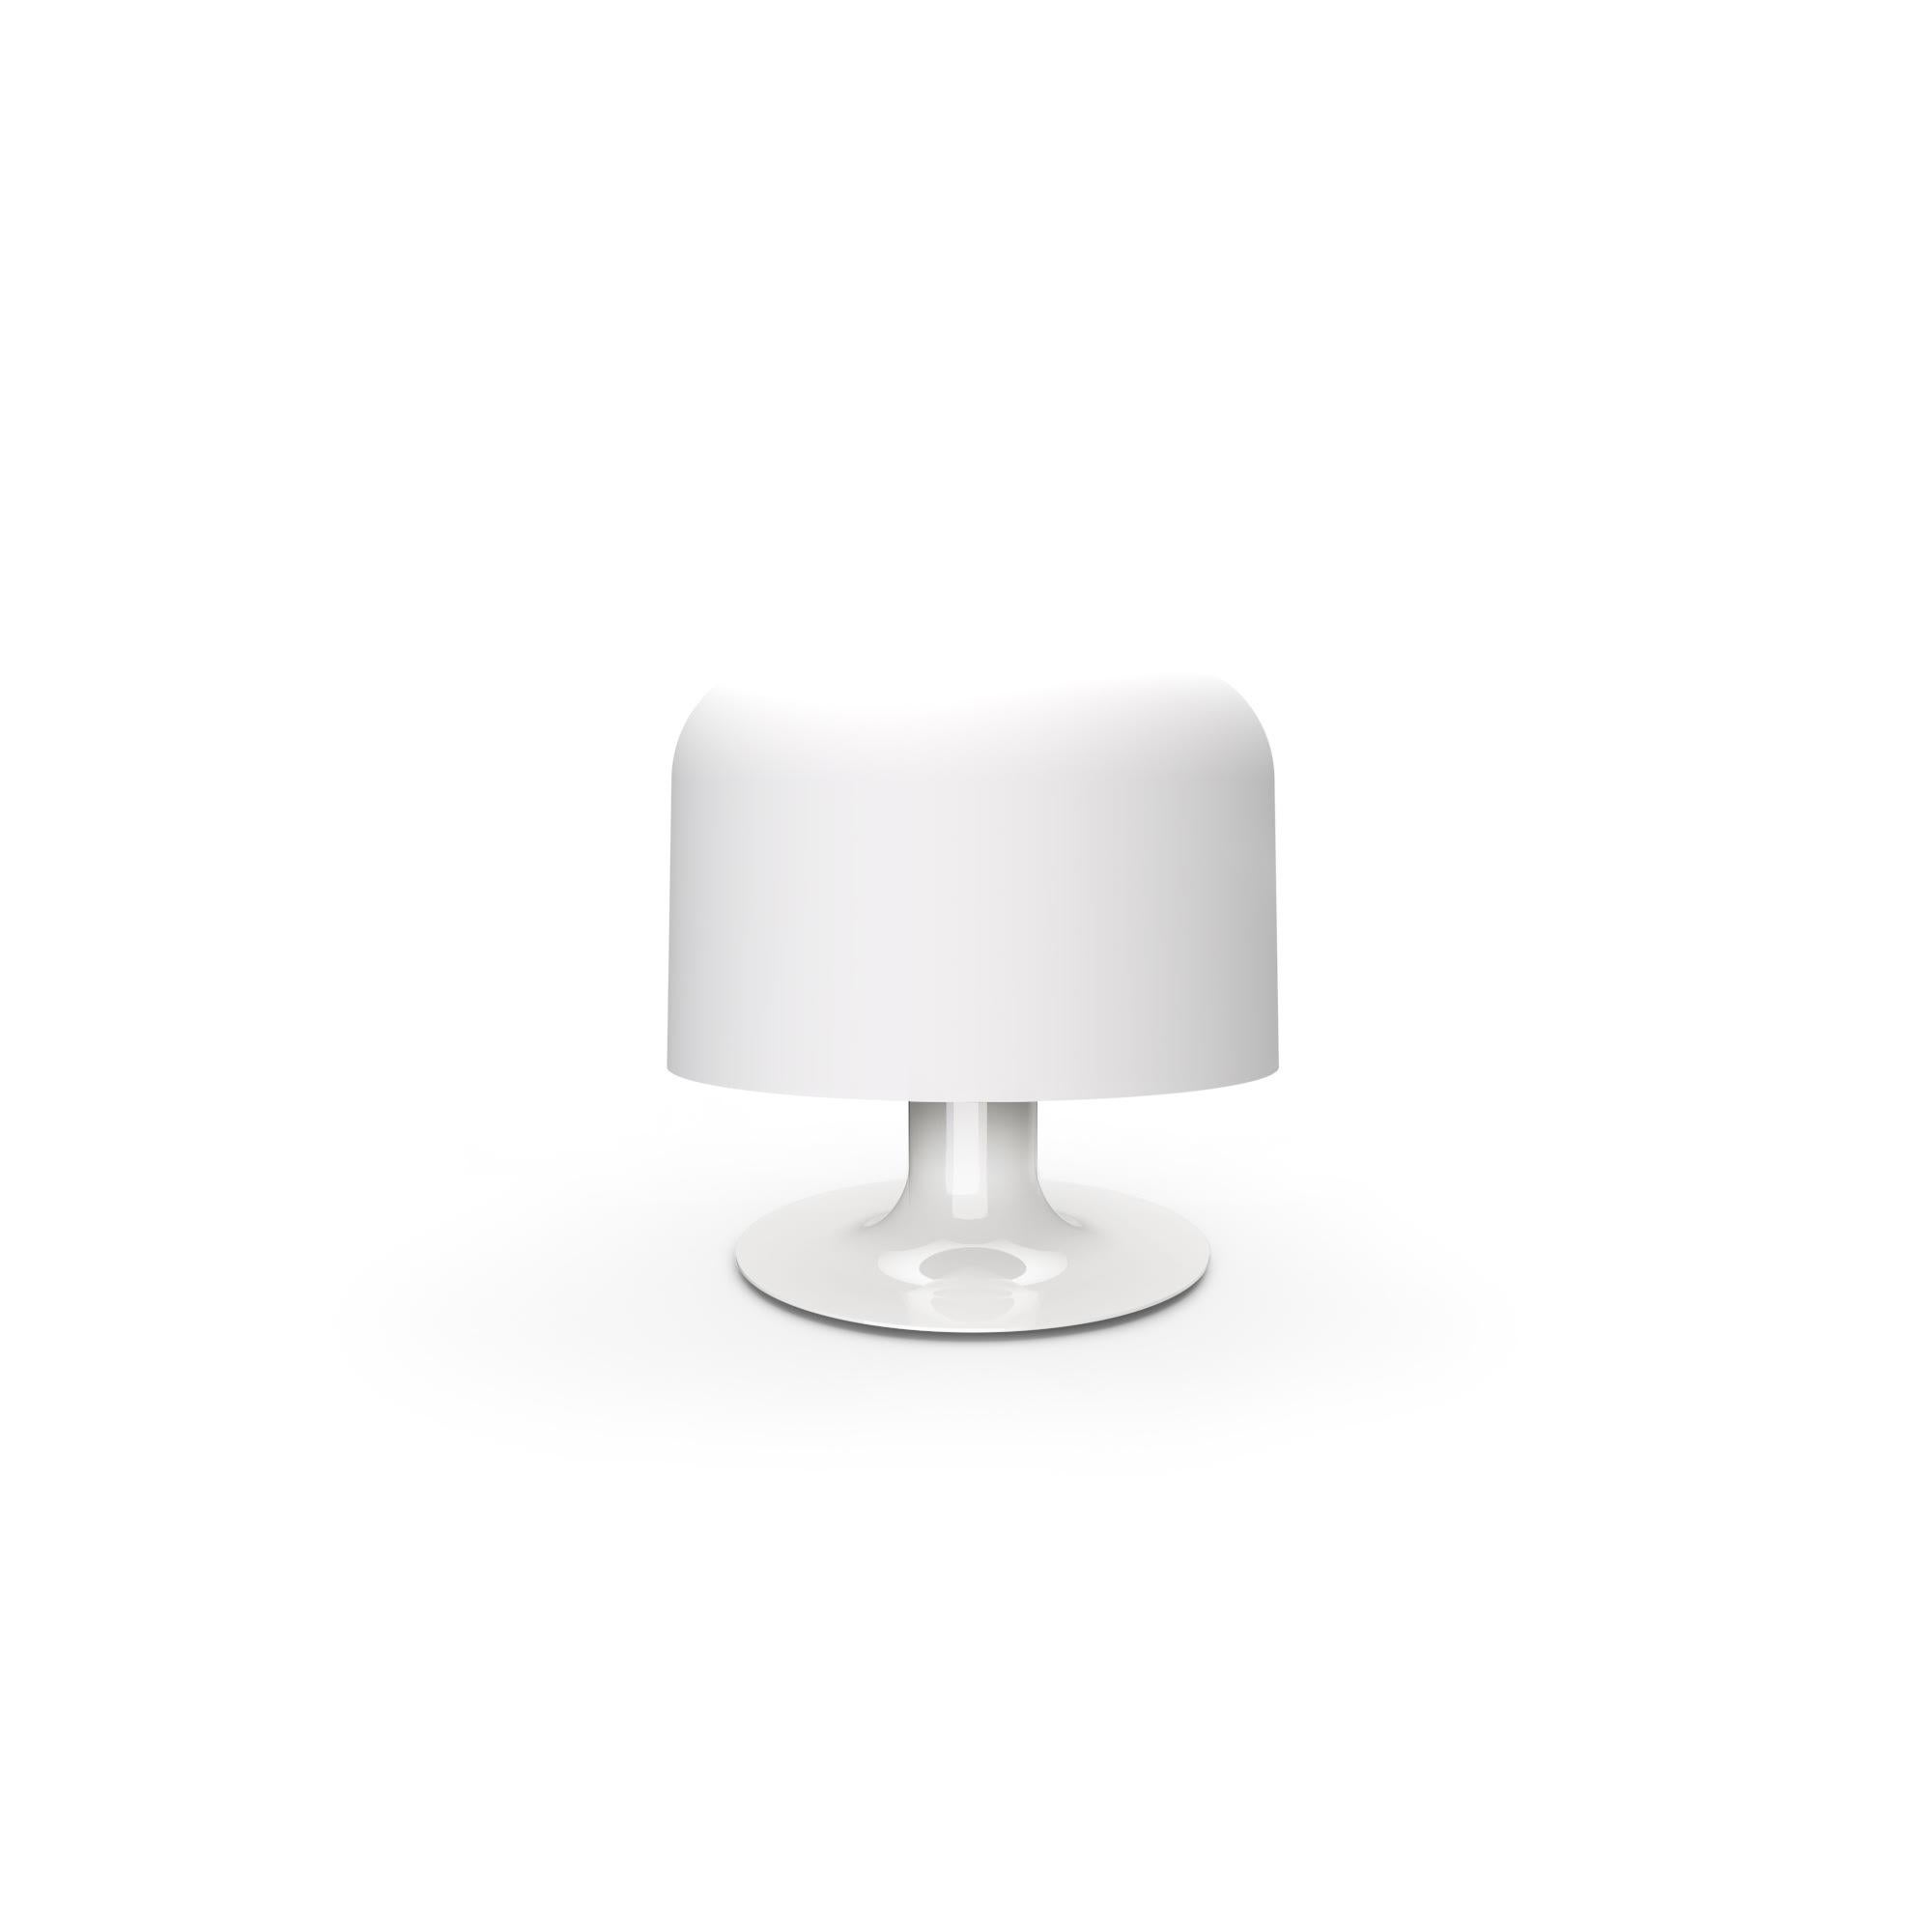 Michel Mortier 10576 metal and glass table lamp for Disderot in white.

Originally designed in 1972, this sculptural table lamp is a newly produced numbered edition with an authentication certificate. Made in France by Disderot with many of the